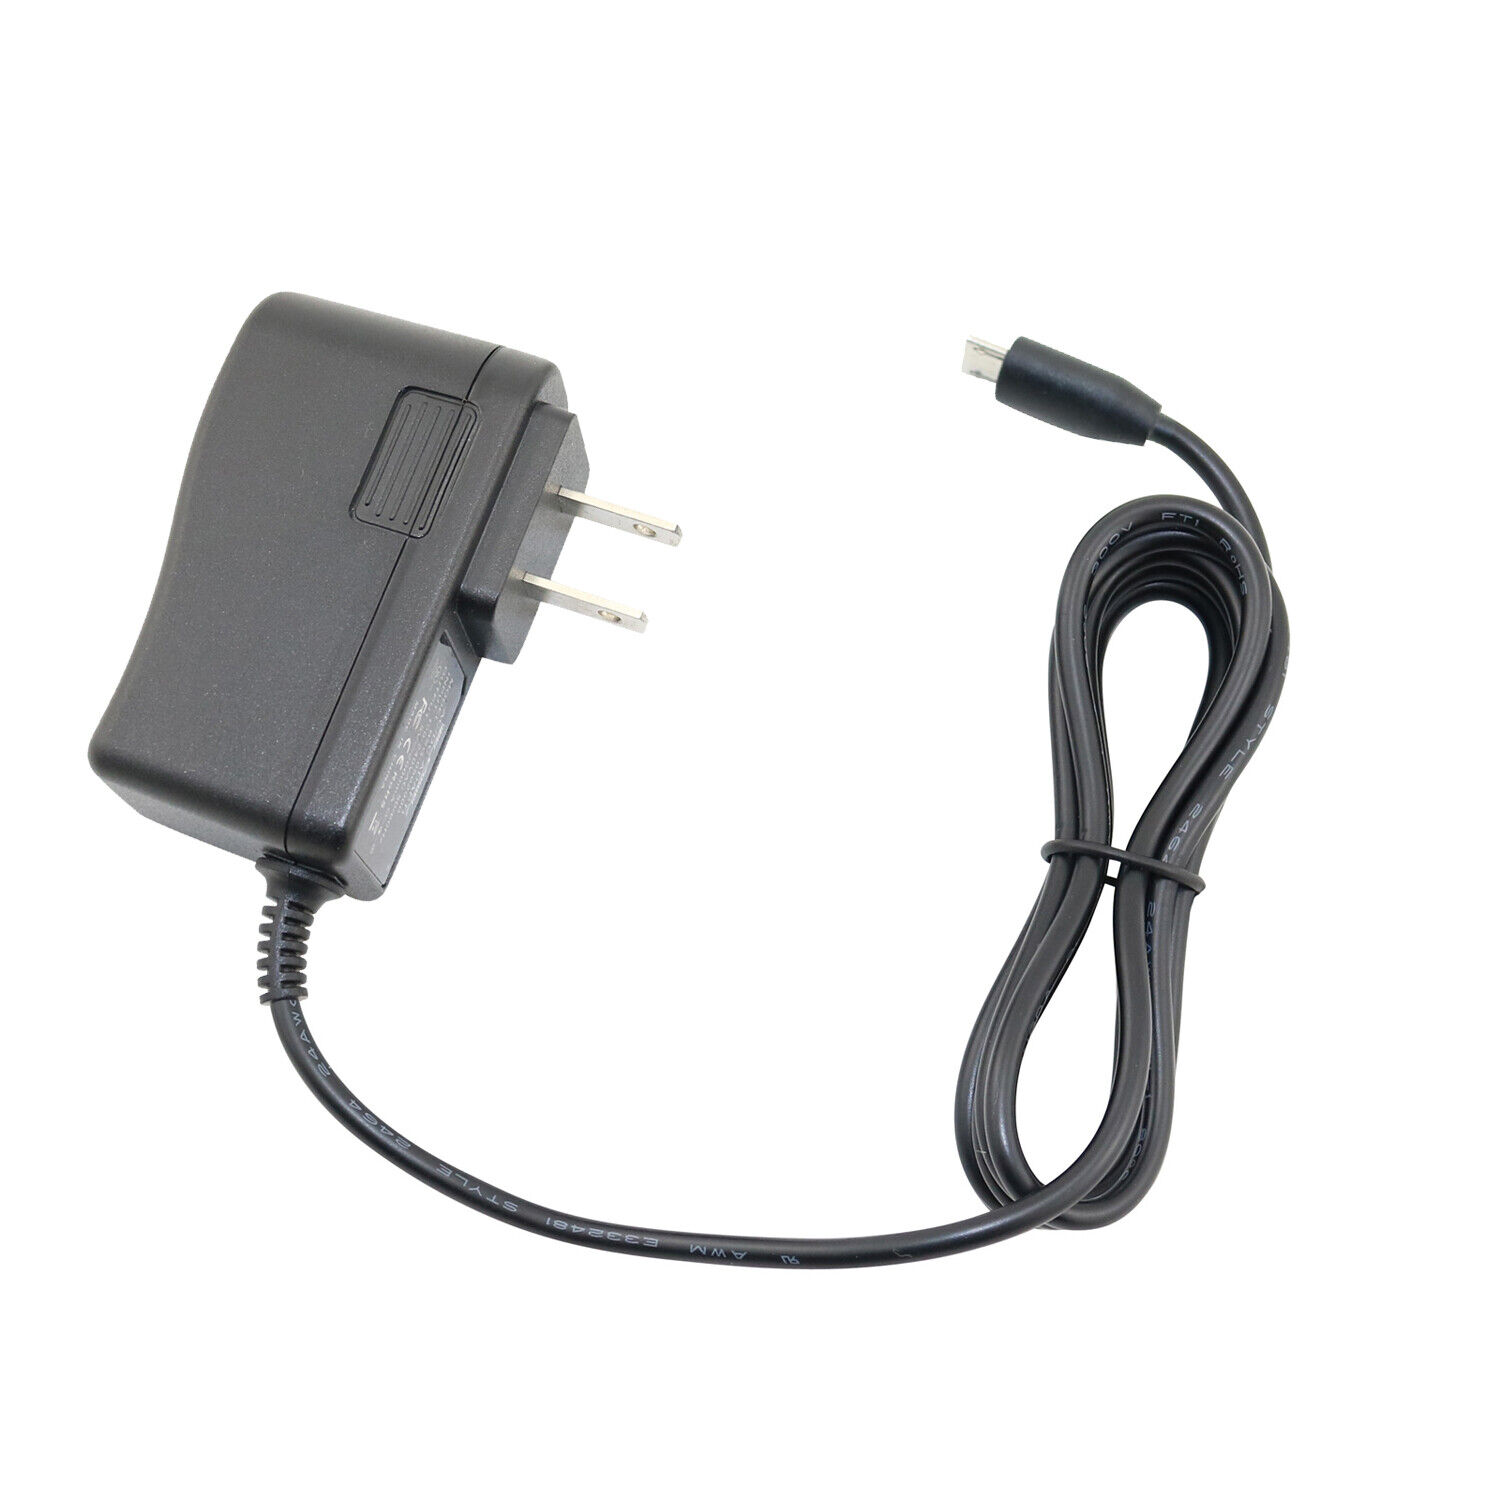 Charger for Polaroid ZIP Mobile Printer AC/DC Adapter Power Supply Cord Charger for Polaroid ZIP Mobile Printer AC/DC A